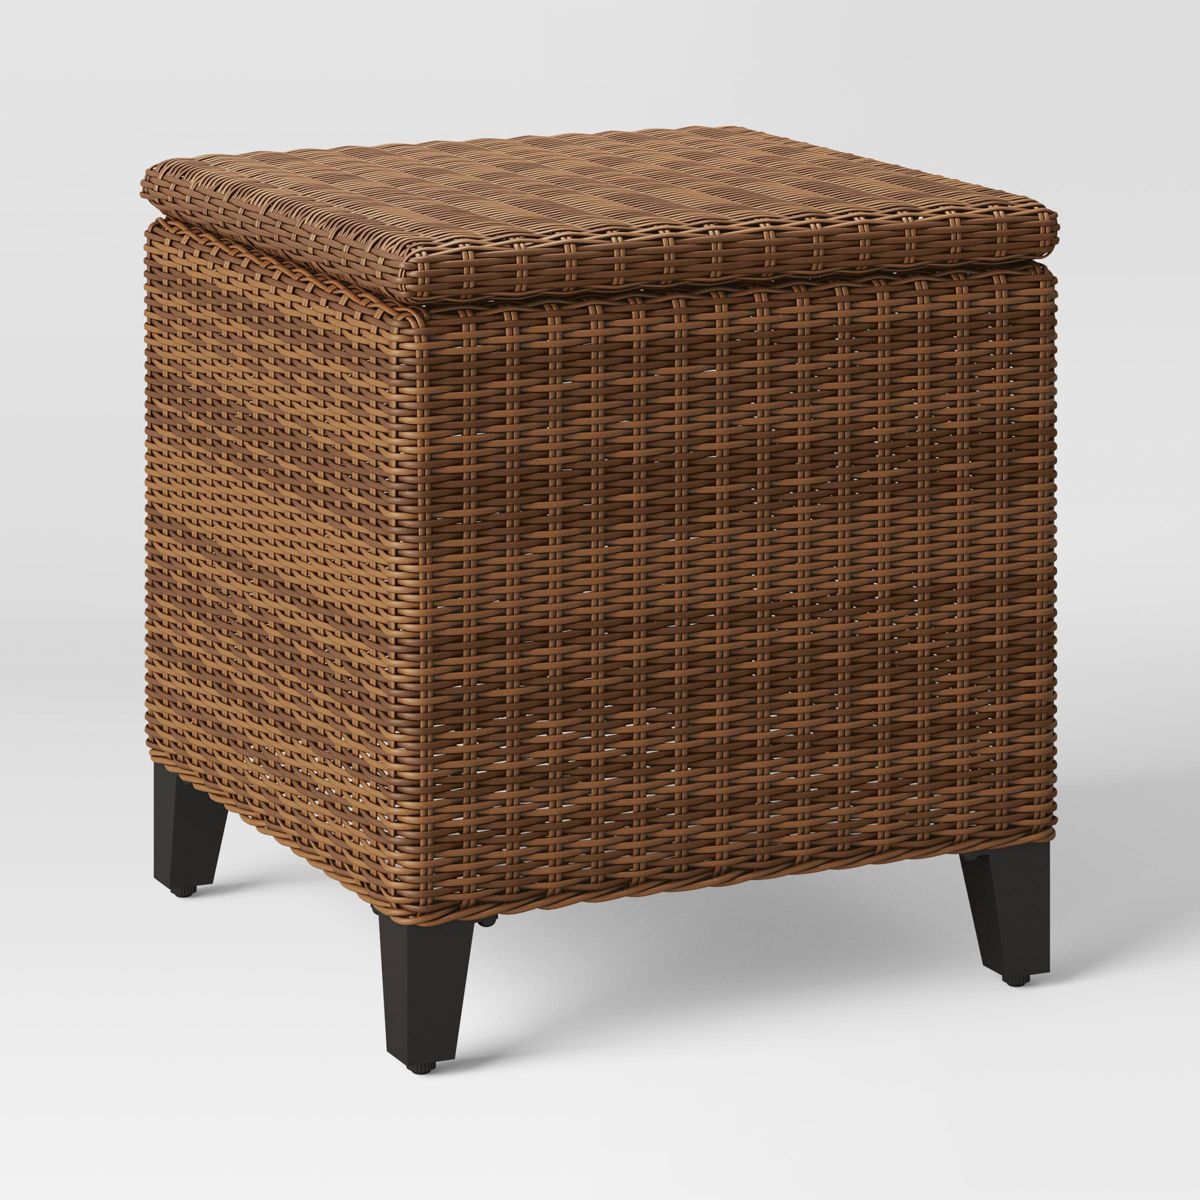 Brookfield Patio End Table with Storage - Brown - Threshold™ | Target